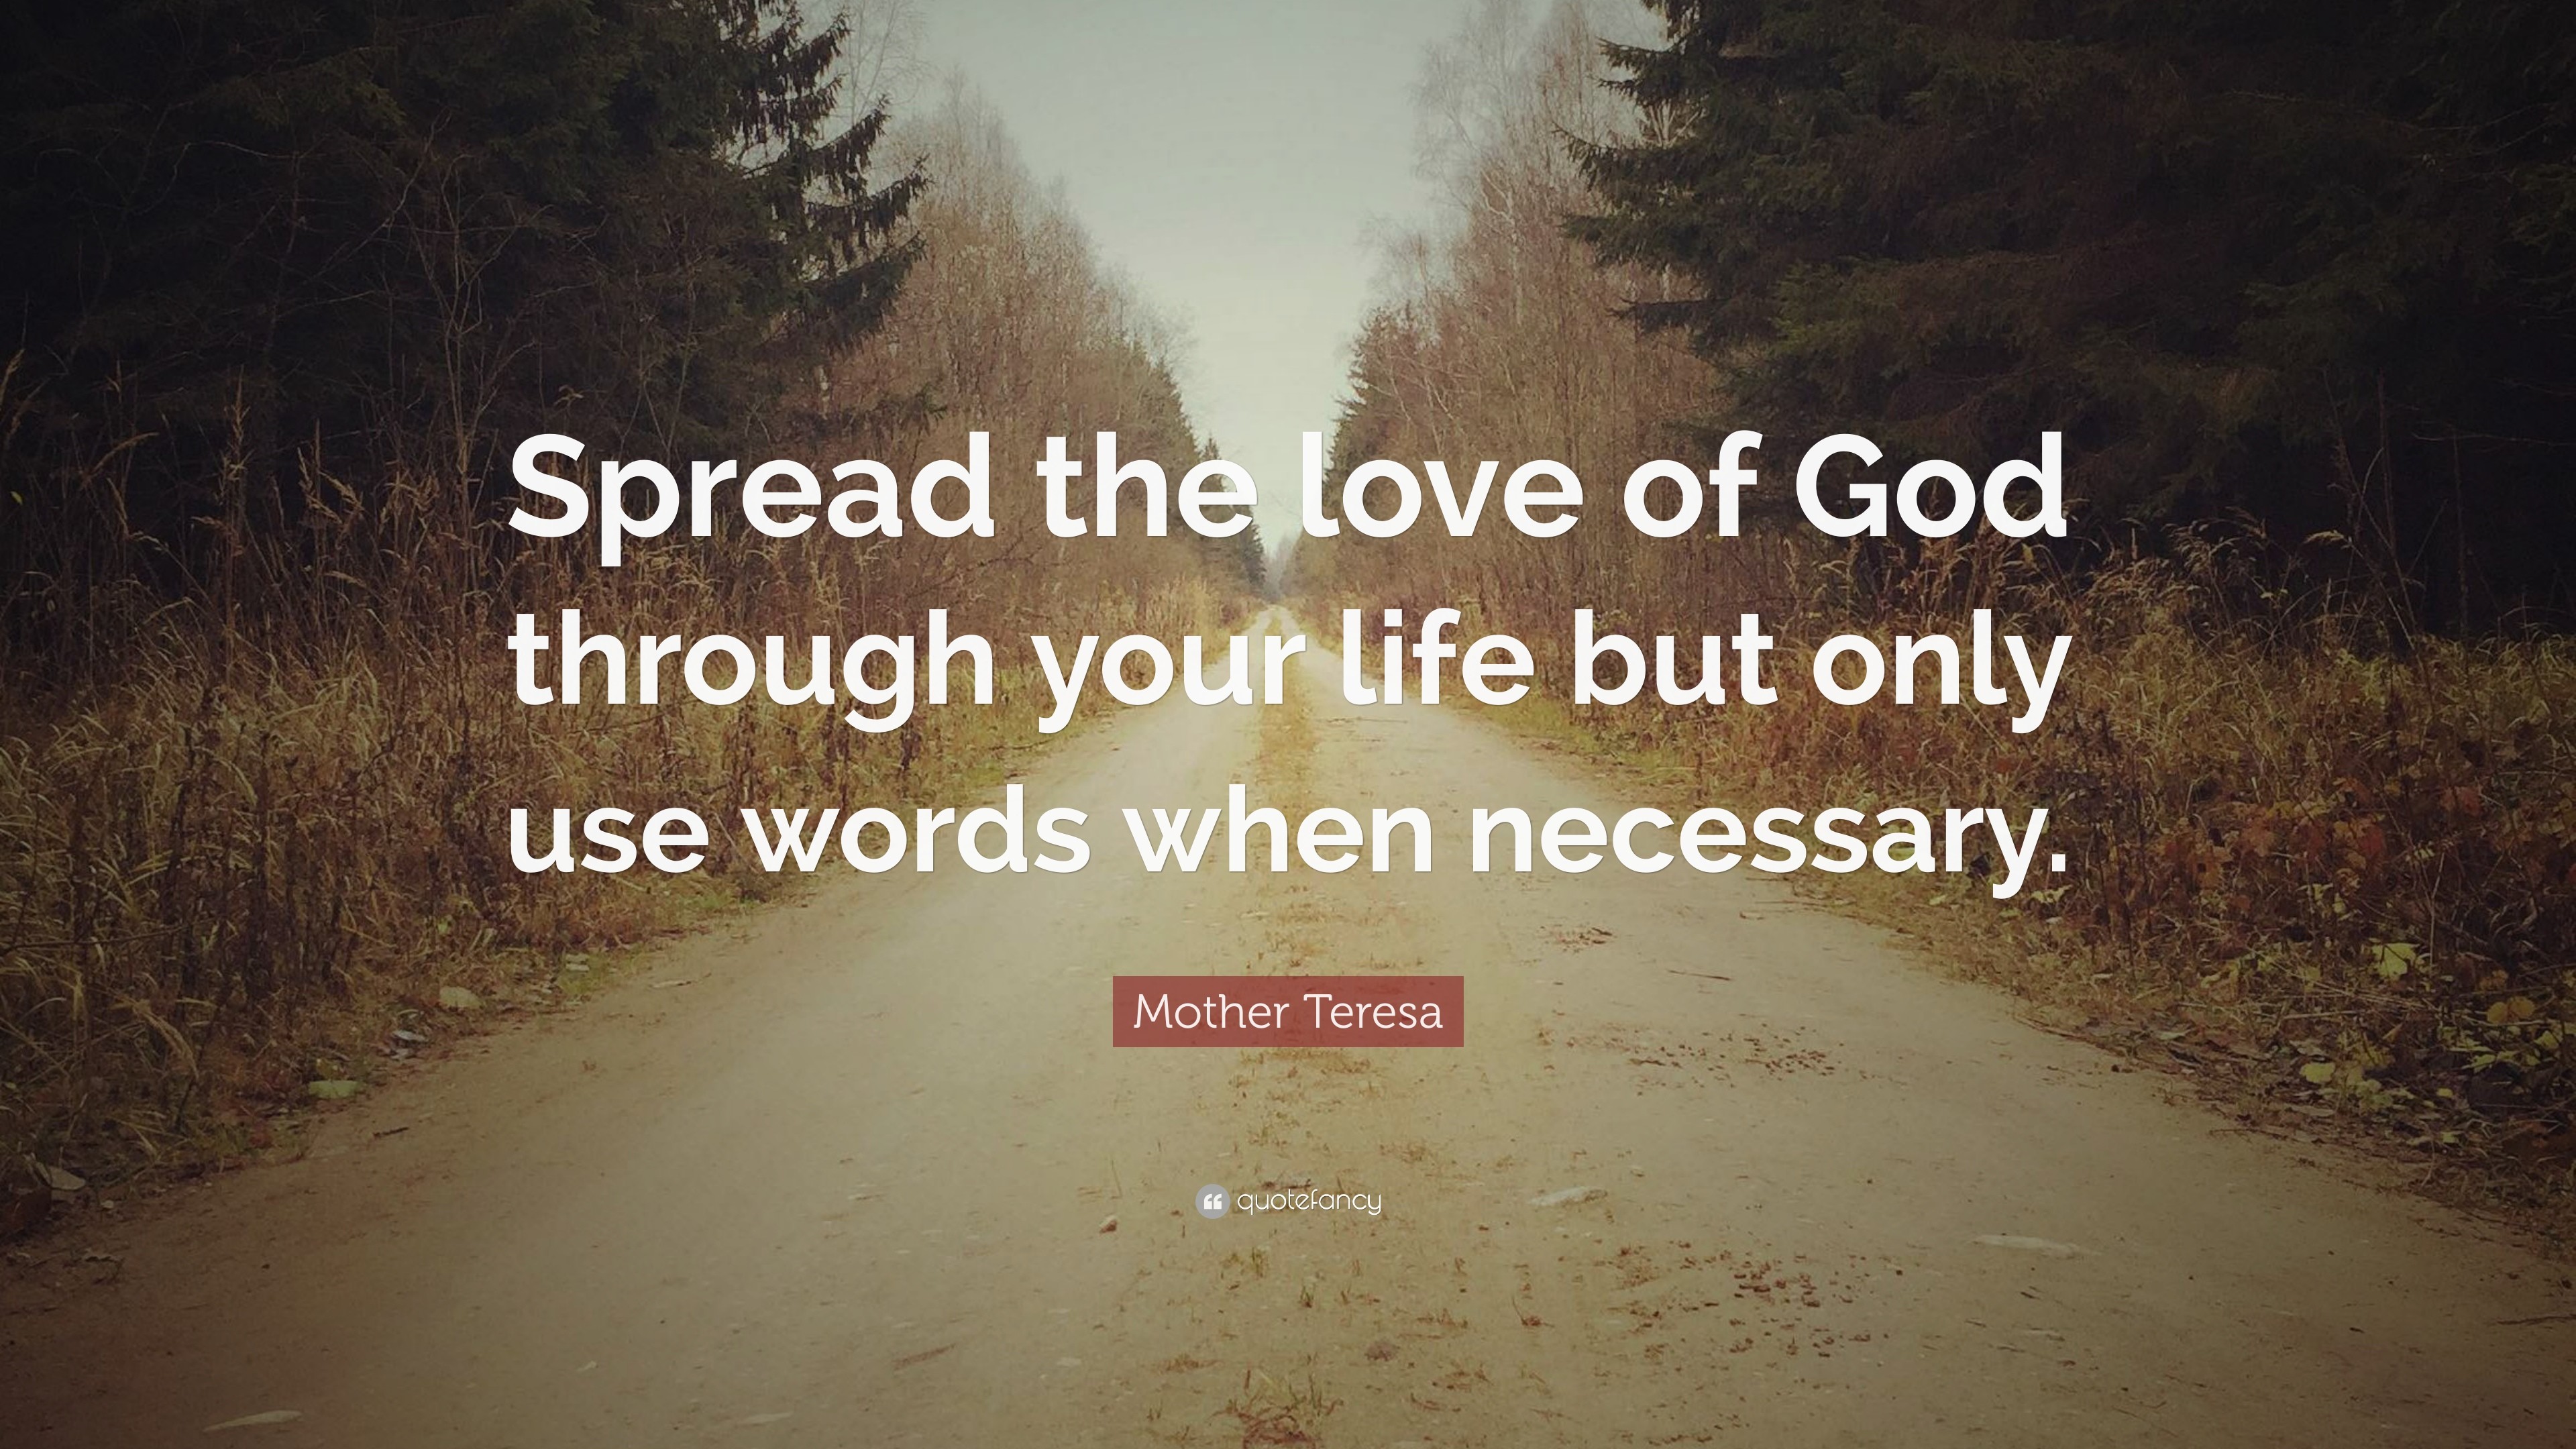 3840x2160 Mother Teresa Quote: “Spread the love of God through your life but only use